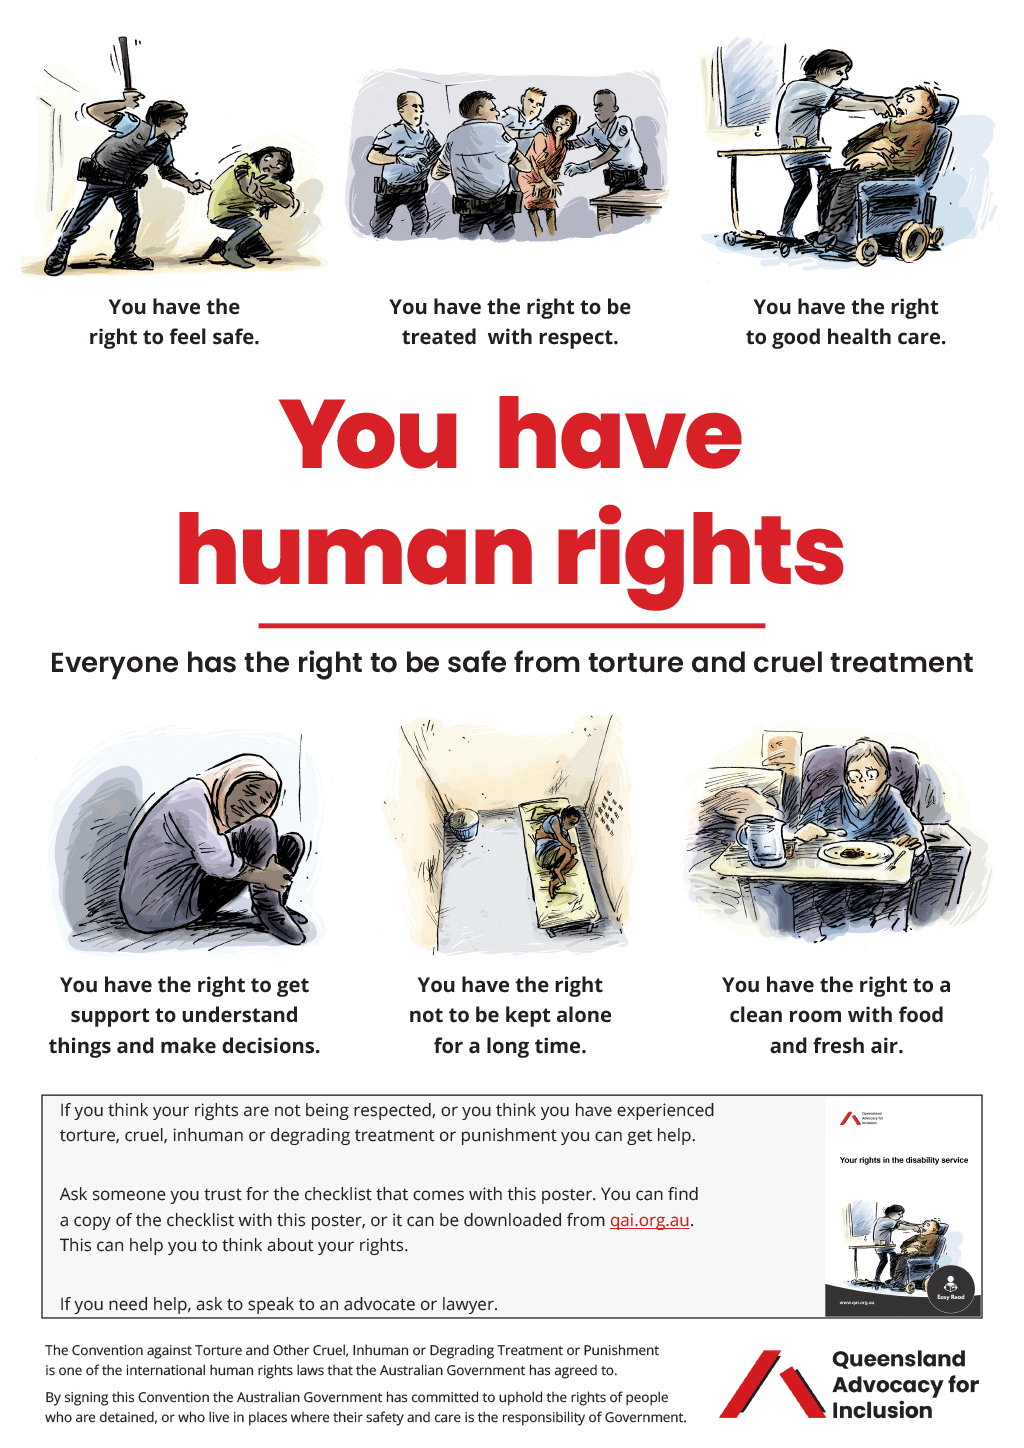 Image of "You have human rights" poster. PDF and Word versions available.